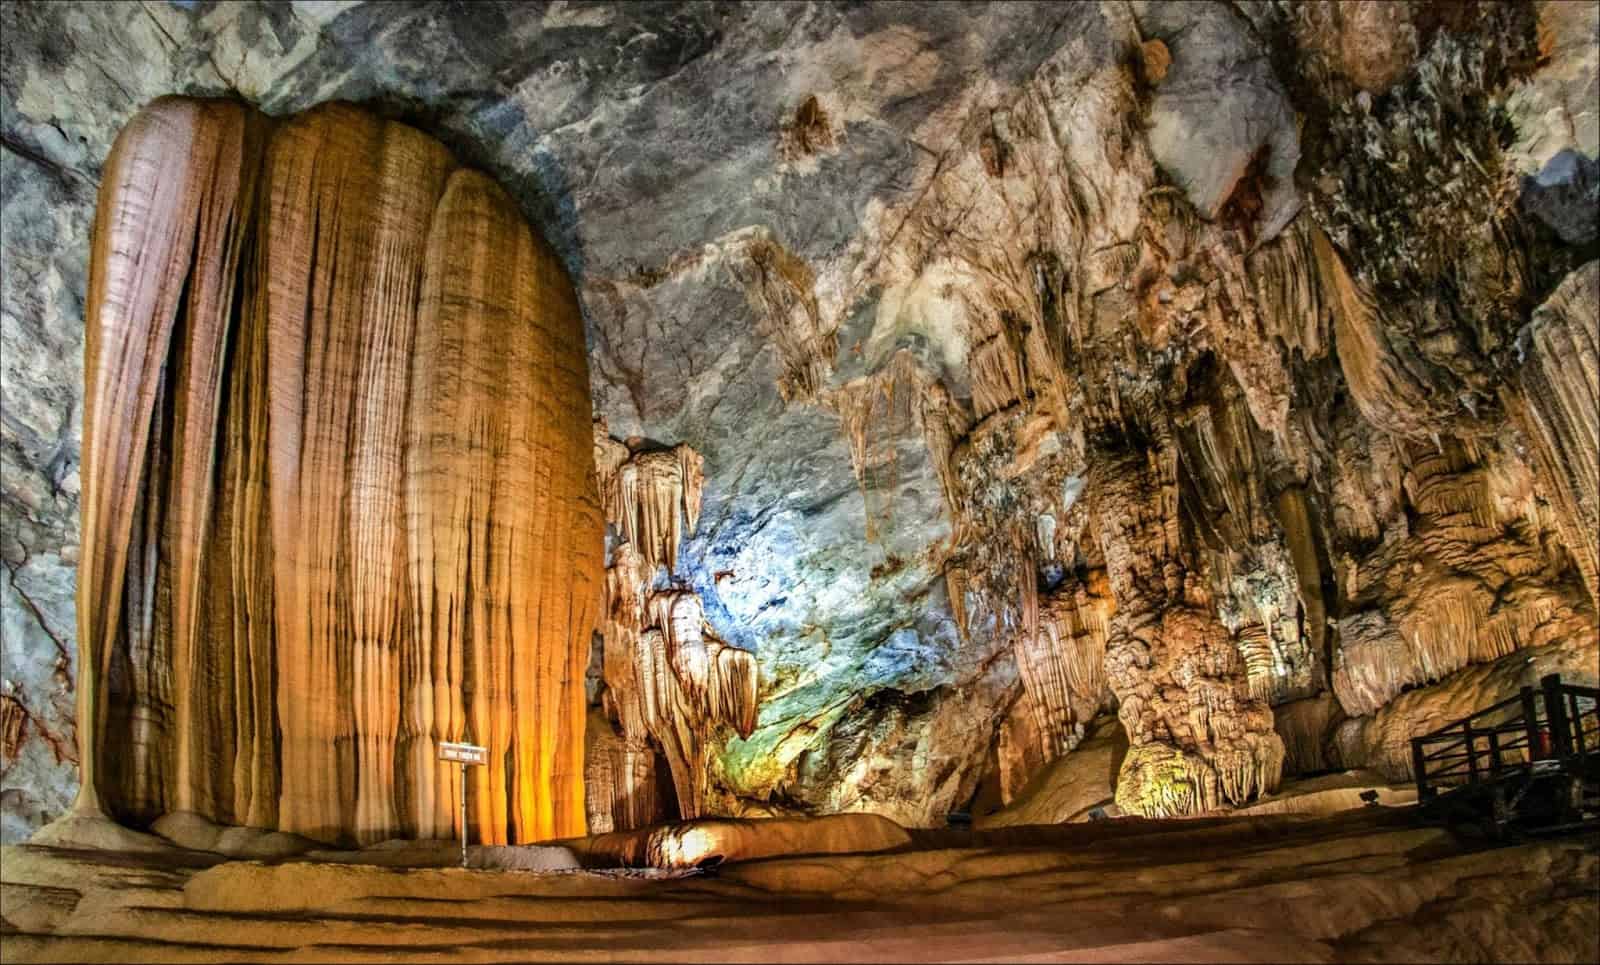 Discover Paradise Cave from Hue